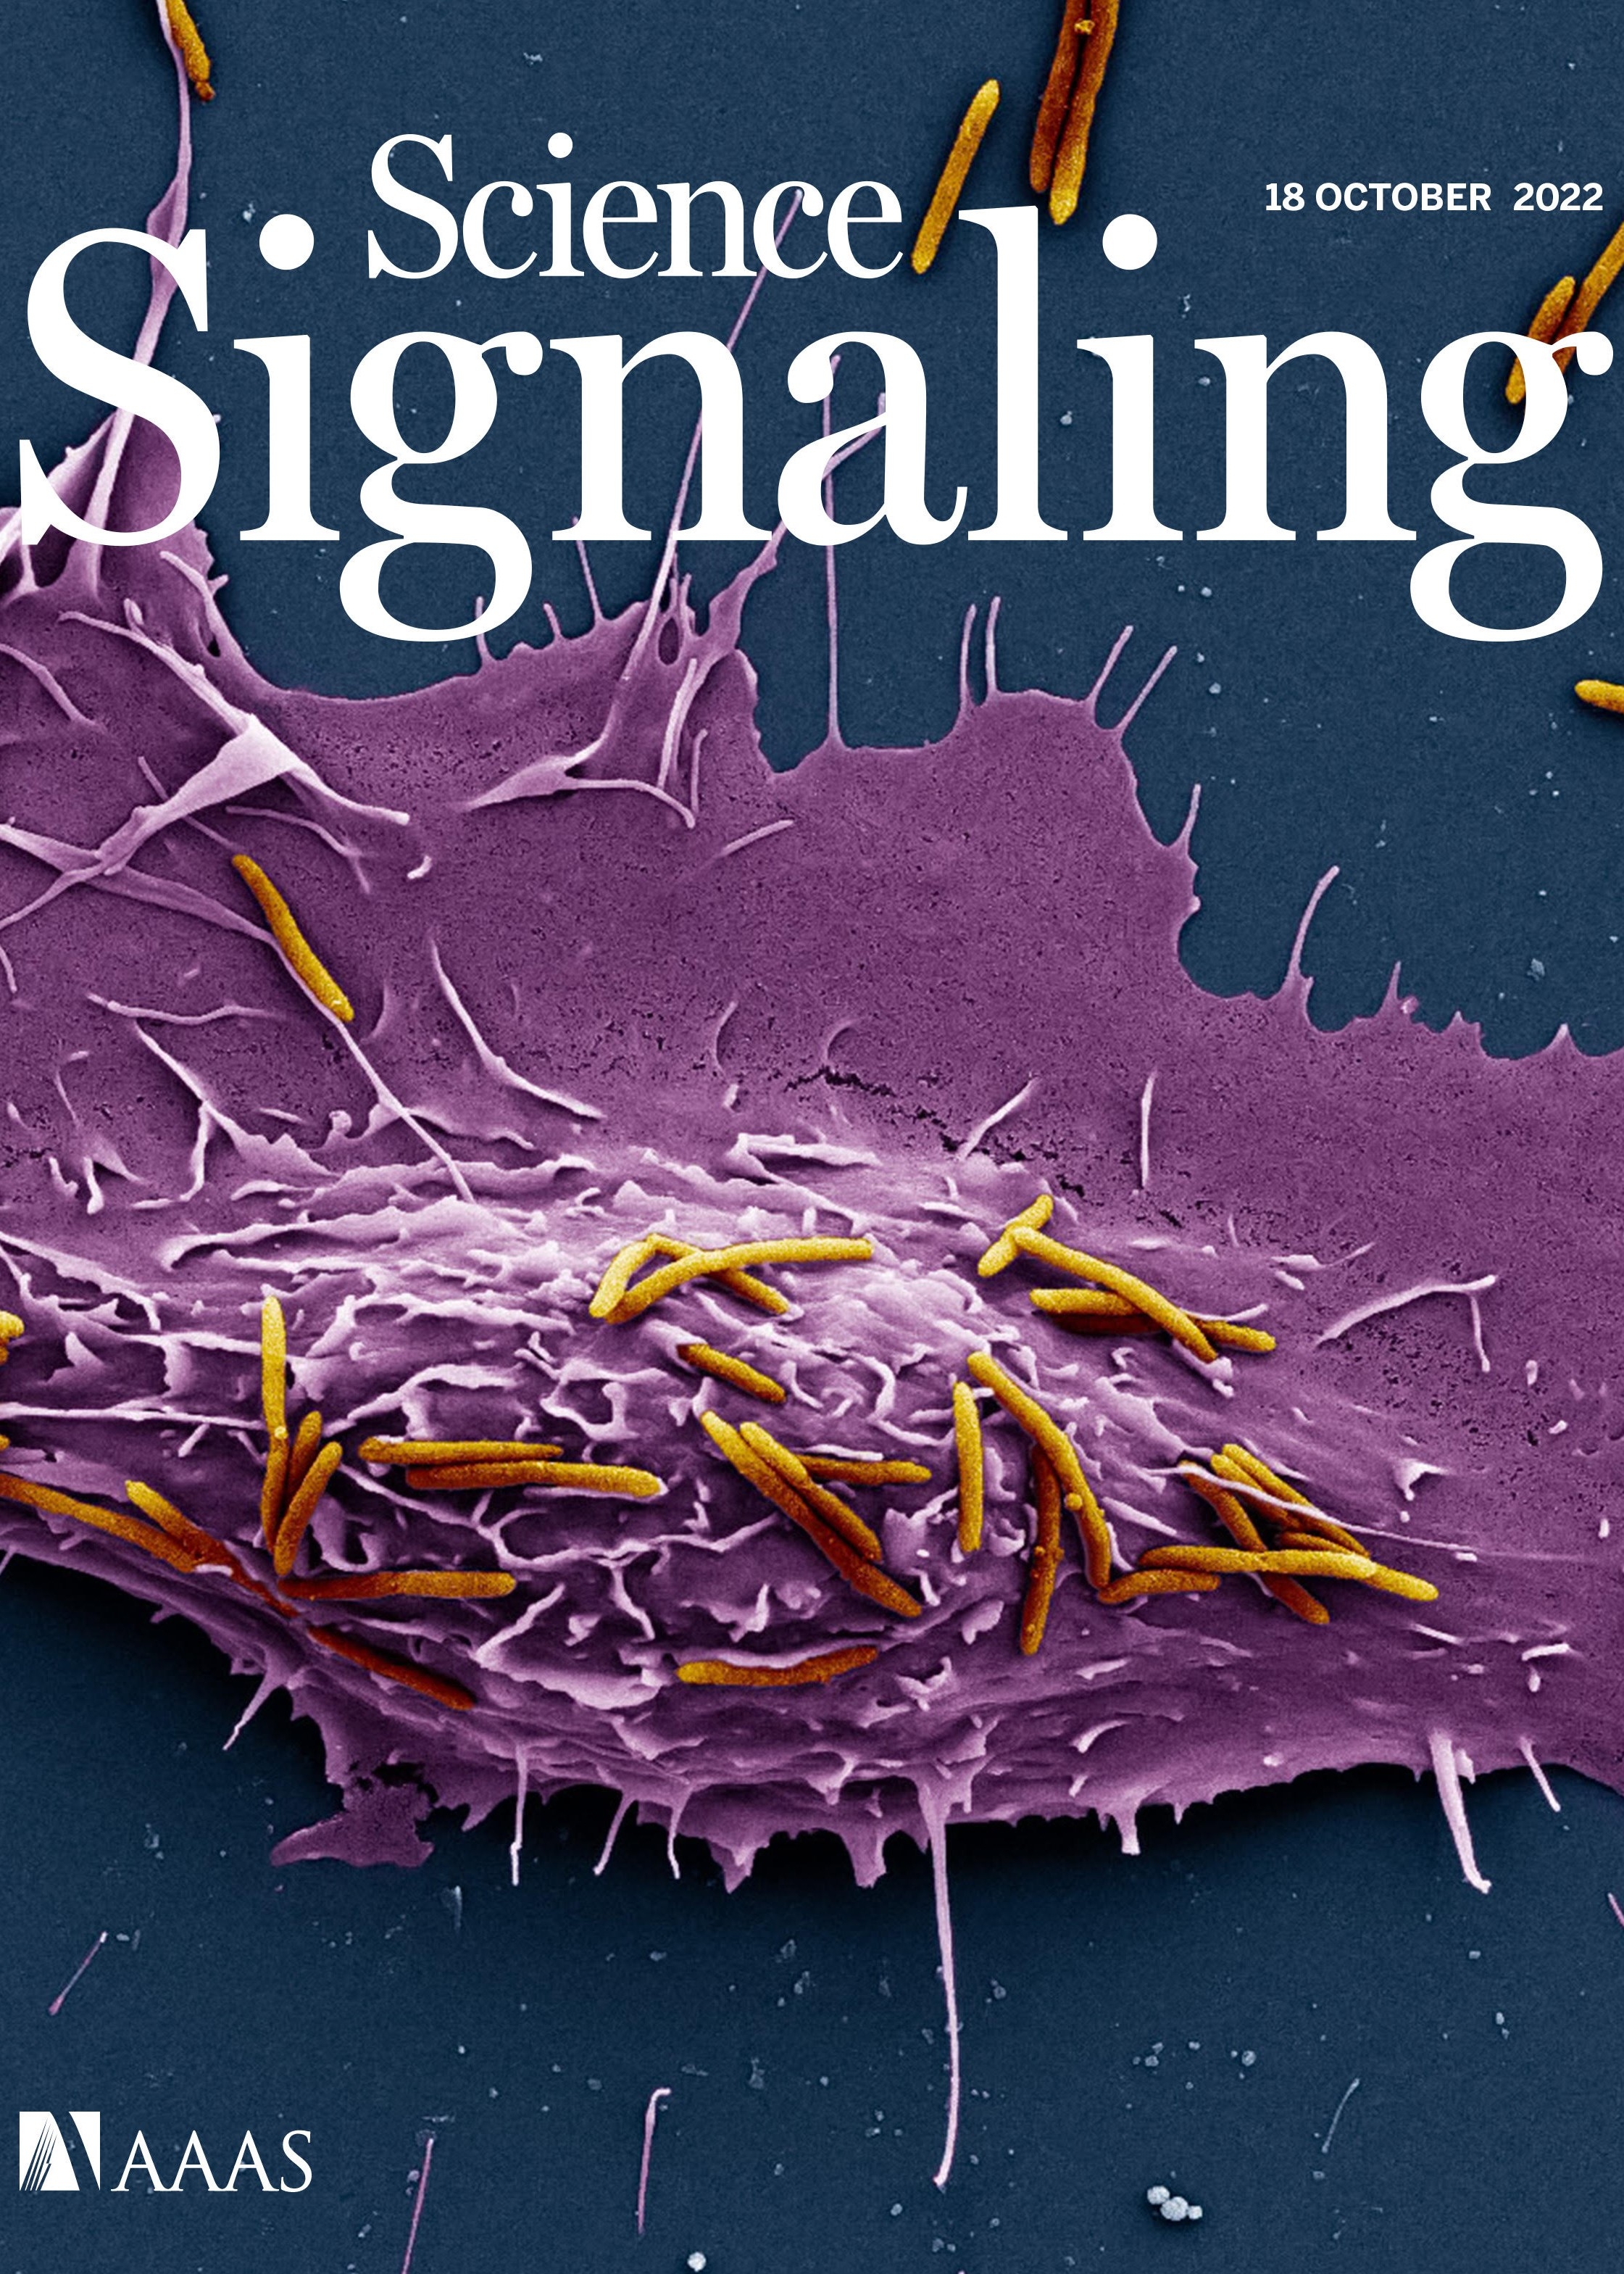 Science Signaling journal cover